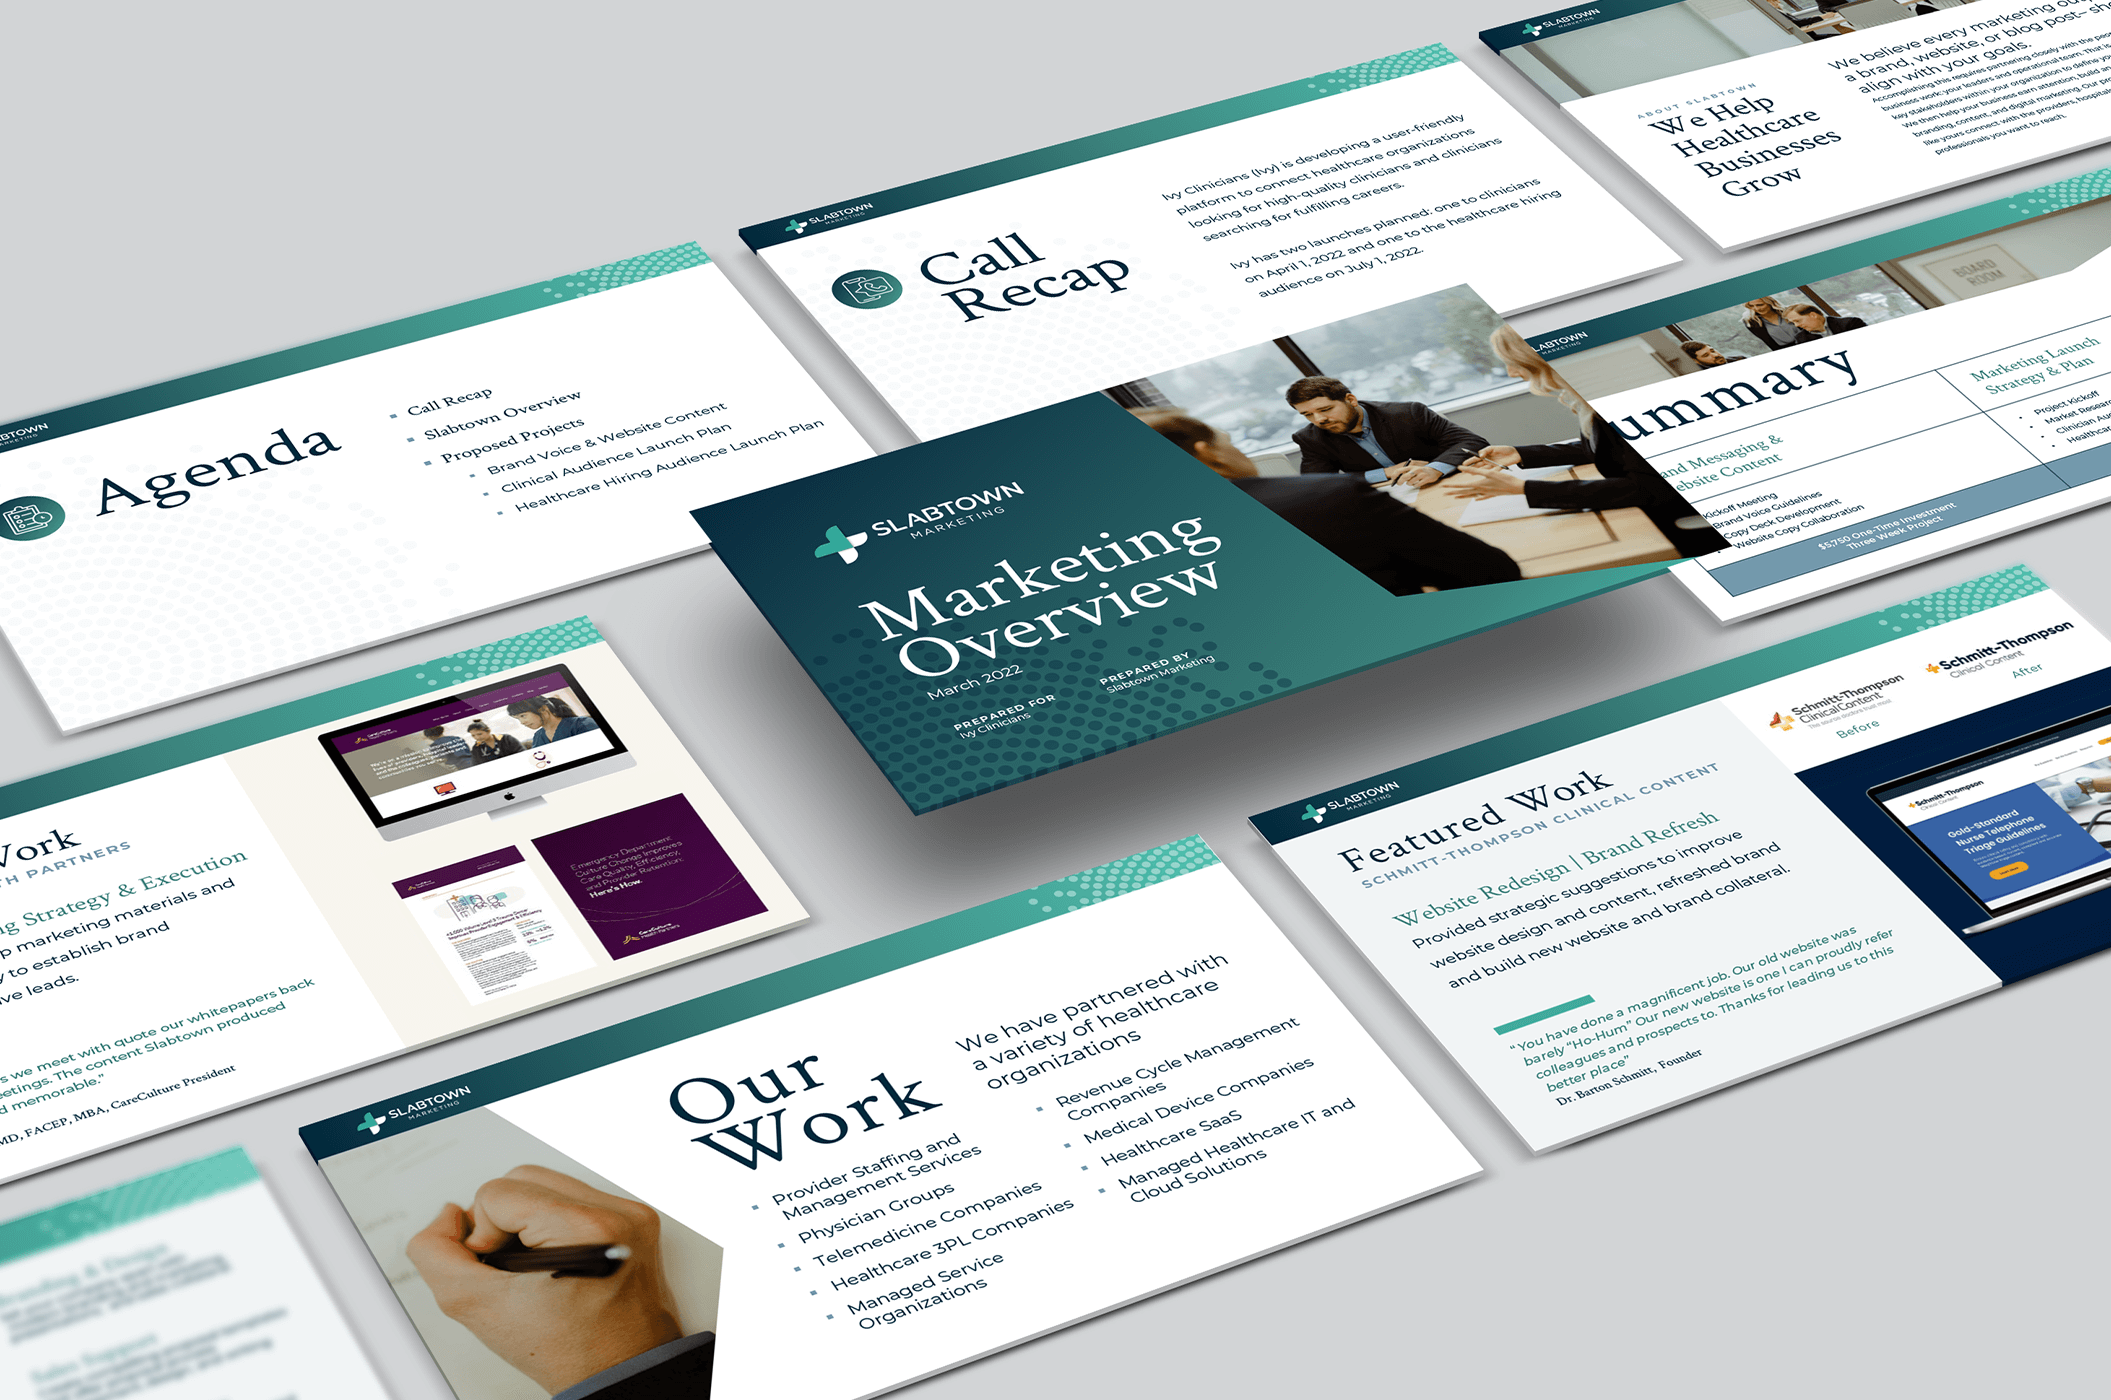 Pitch deck design for Marketing Company